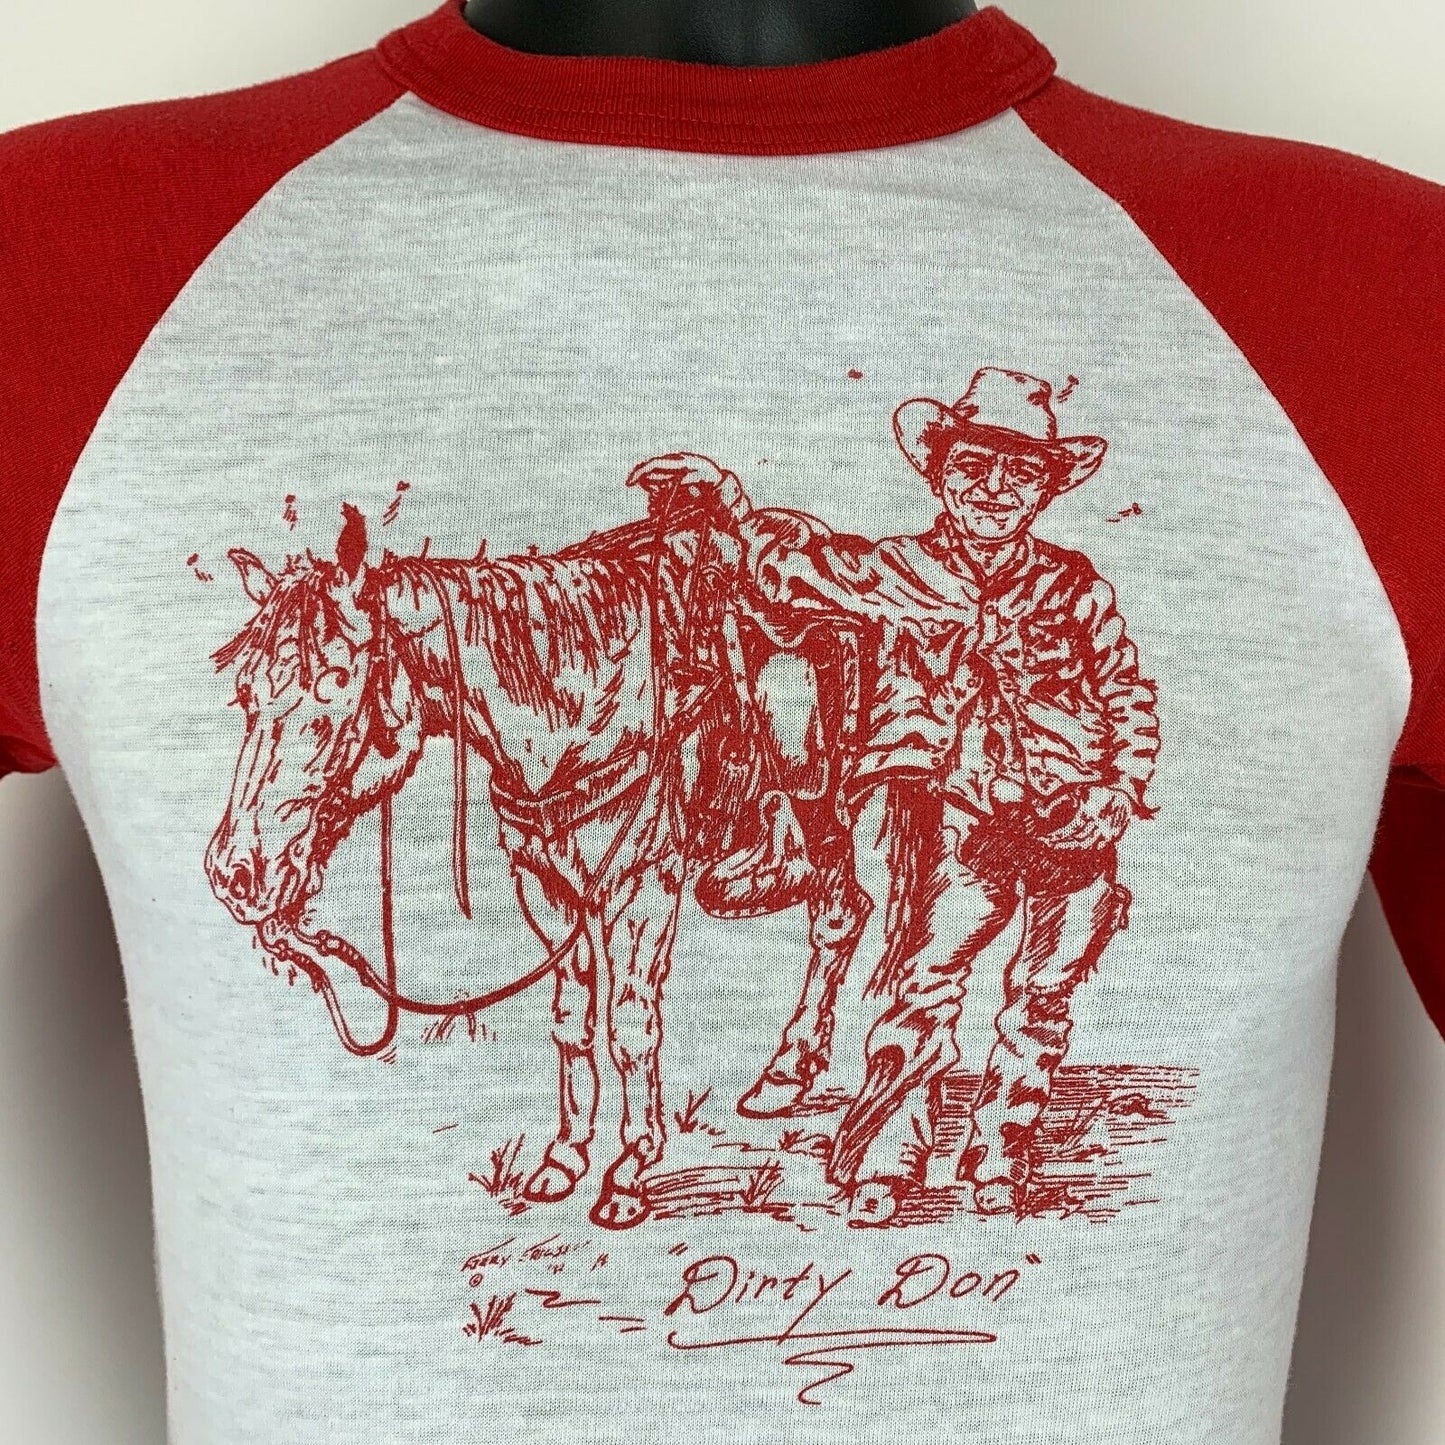 Vintage 1980s Dons Western Wear XS Extra Small T Shirt Cowboy Houston Texas Tee